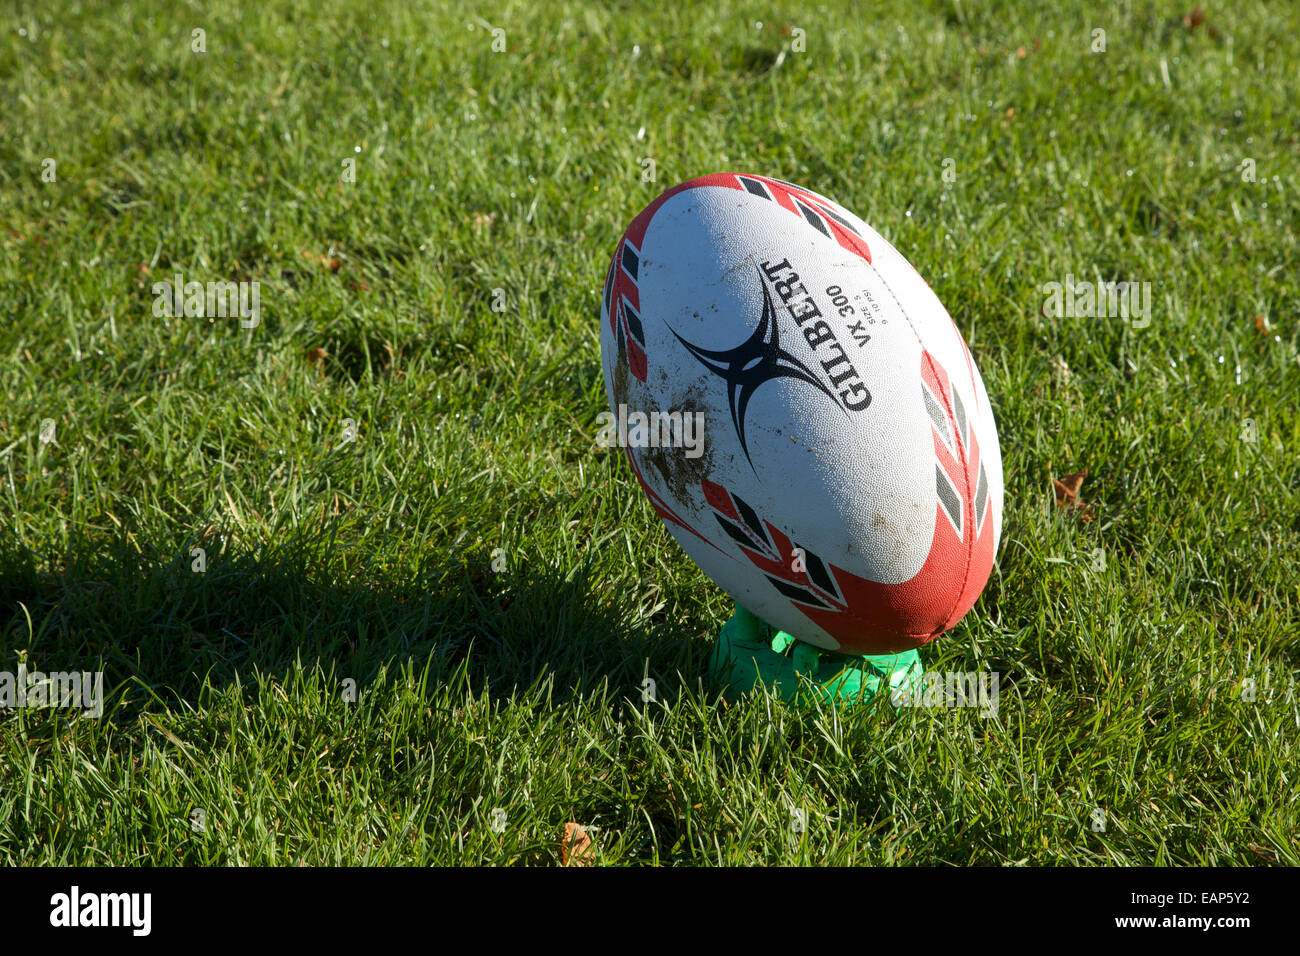 A Gilbert rugby ball on a kicking tee. Stock Photo